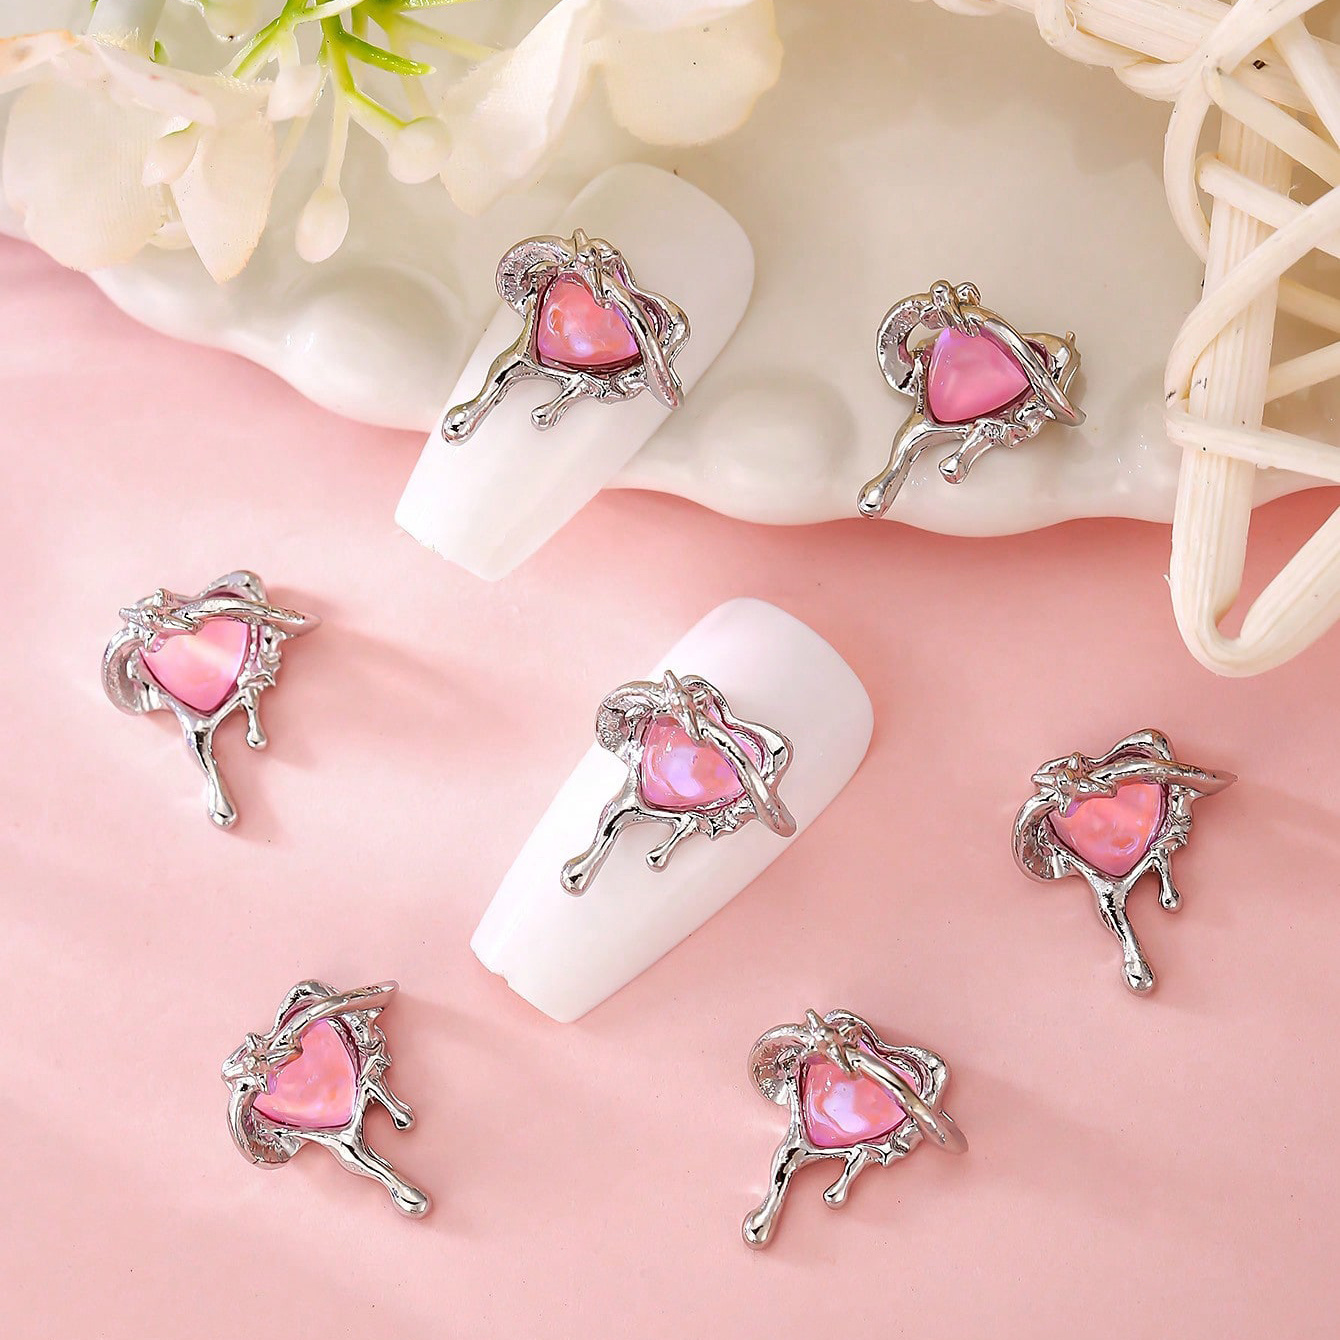 

10pcs Valentine's Day Nail Charms With Rhinestones, Heart Nail Art Accessories, Nail Art Supplies For Women And Girls, Nail Art Jewelry